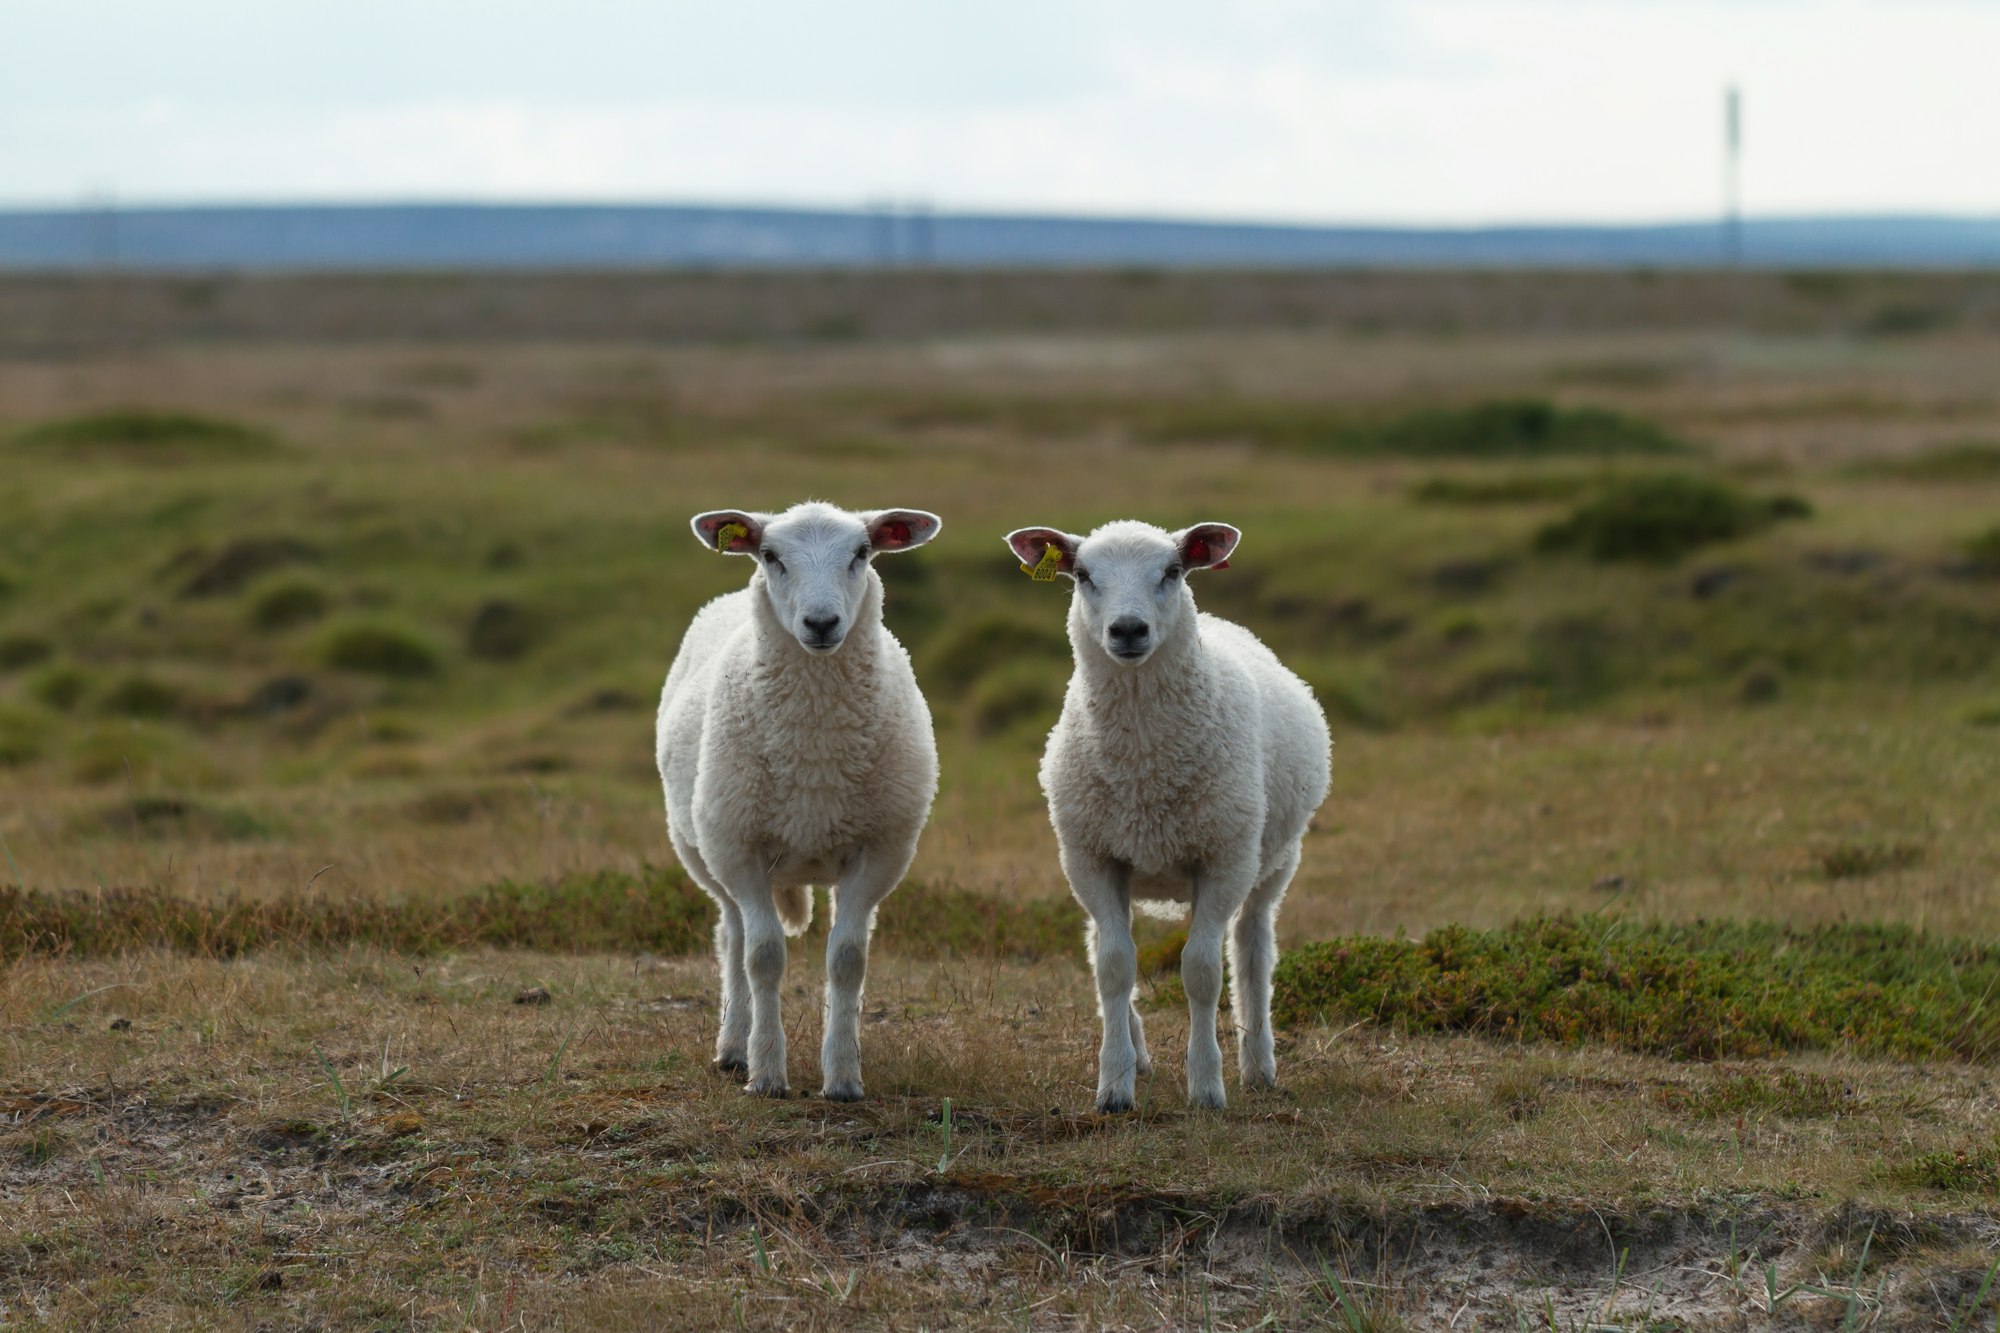 Two curious sheep want to know what's happening in the world of wool.